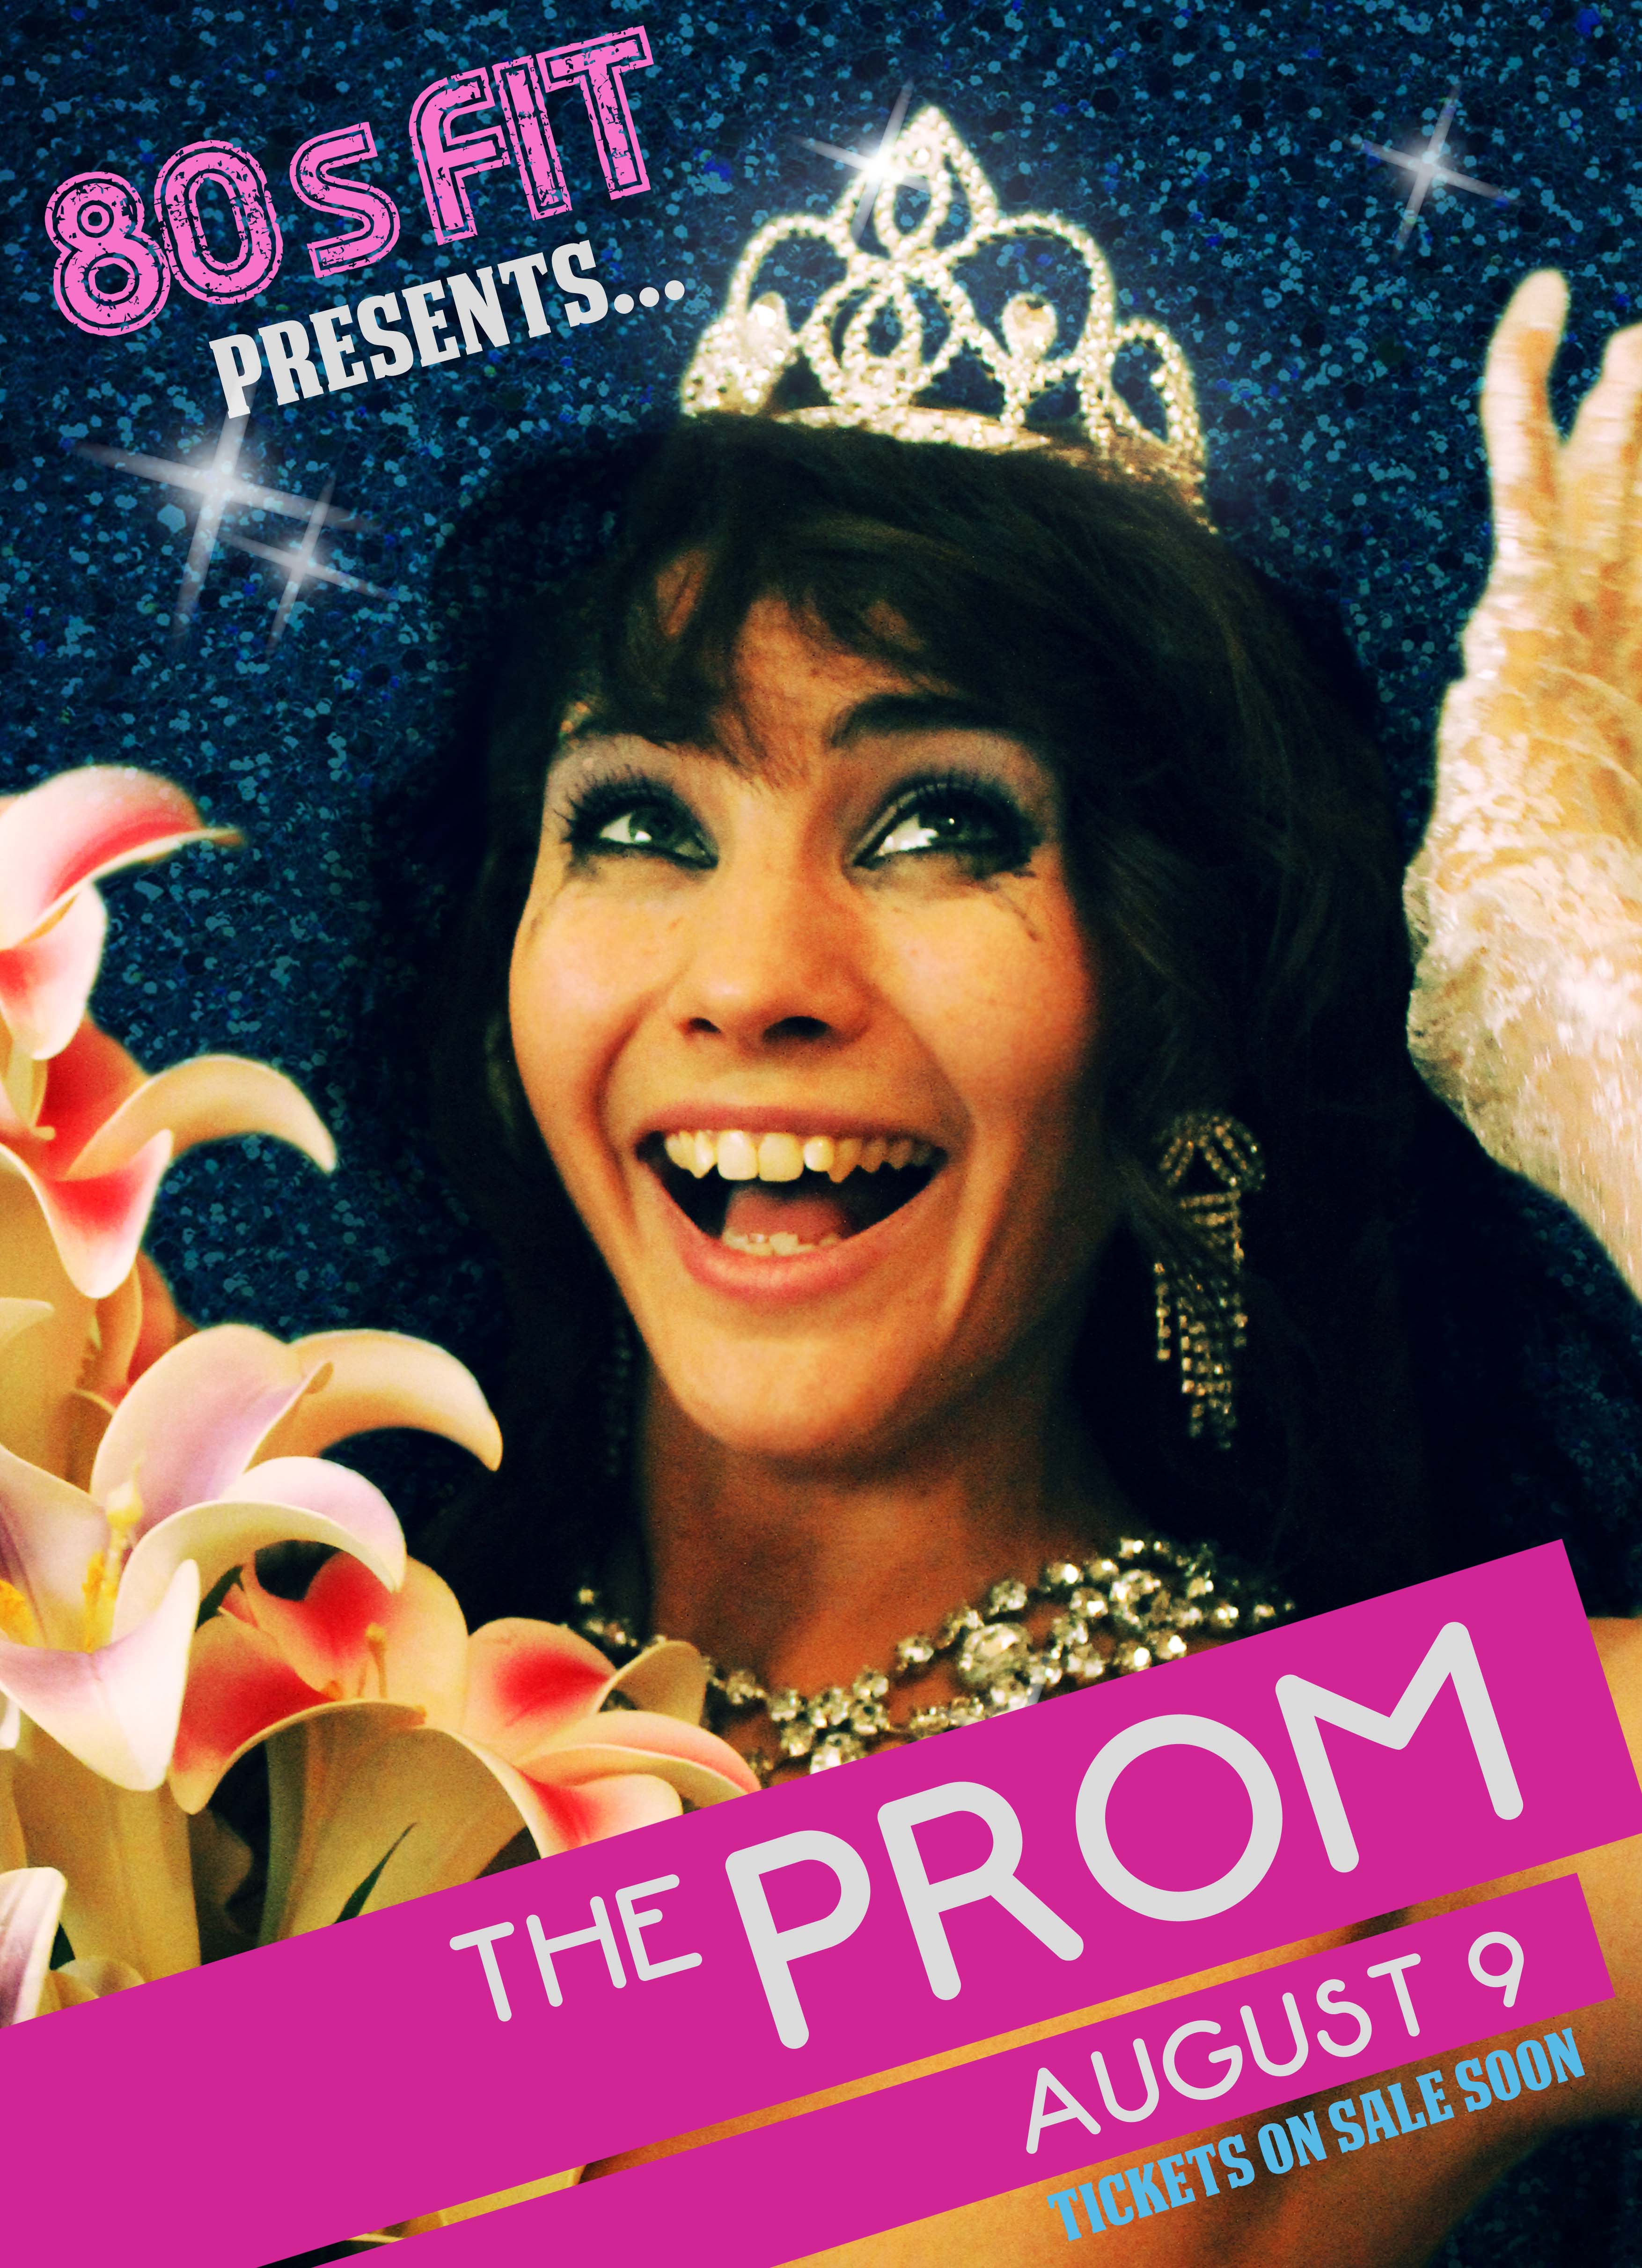 80s Fit Presents… THE PROM!